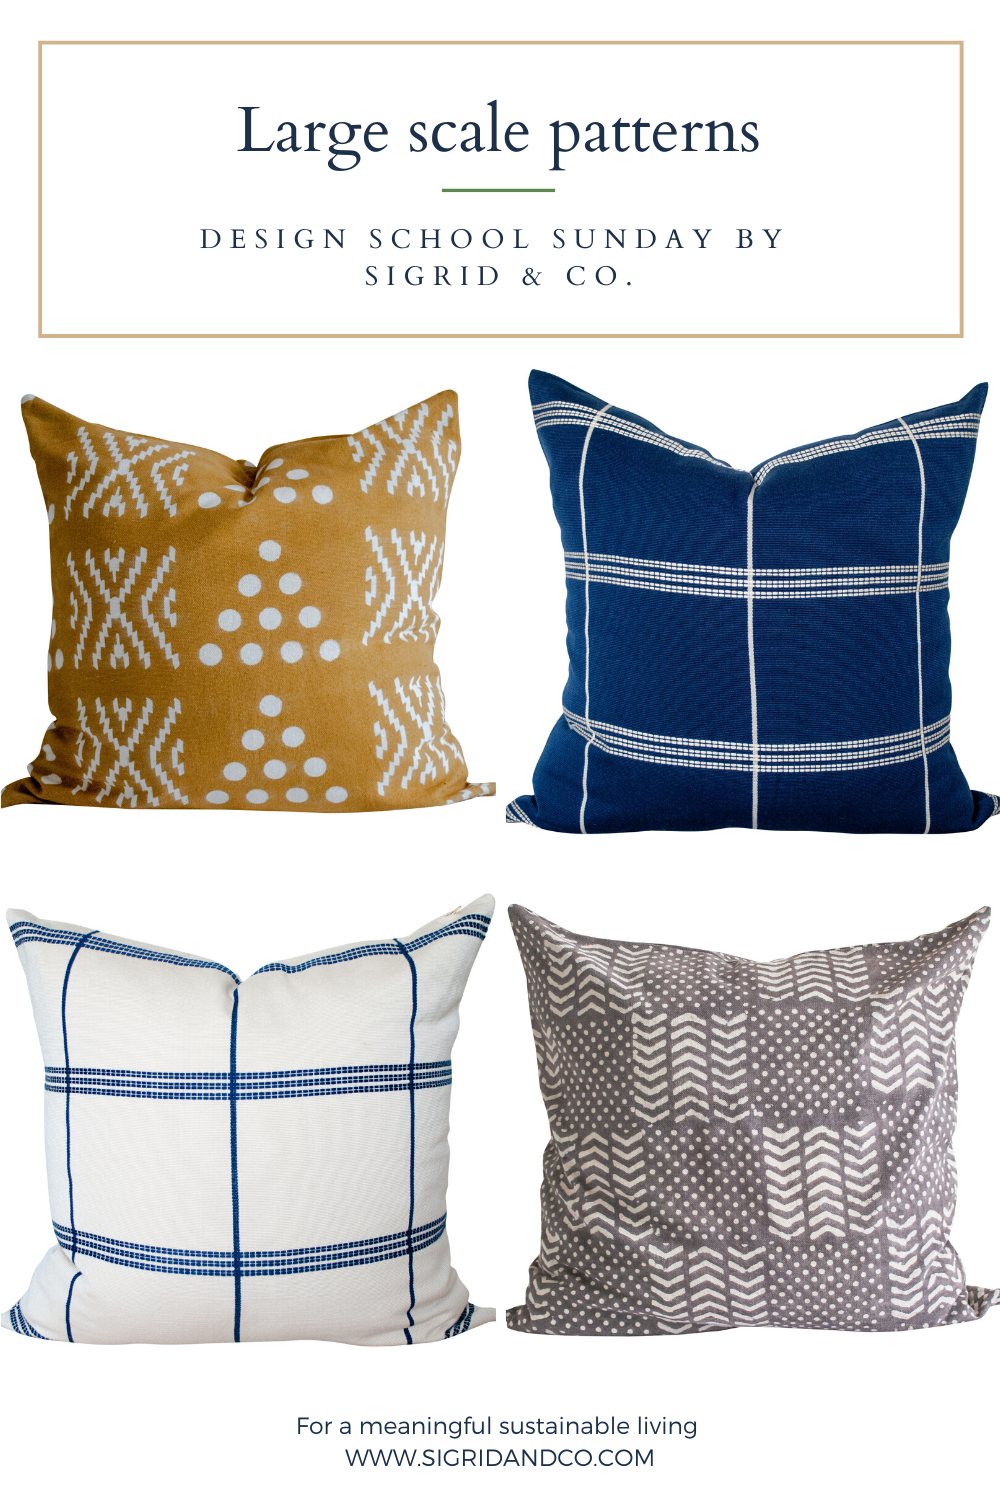 How to Mx and Match your Pillows like a Designer